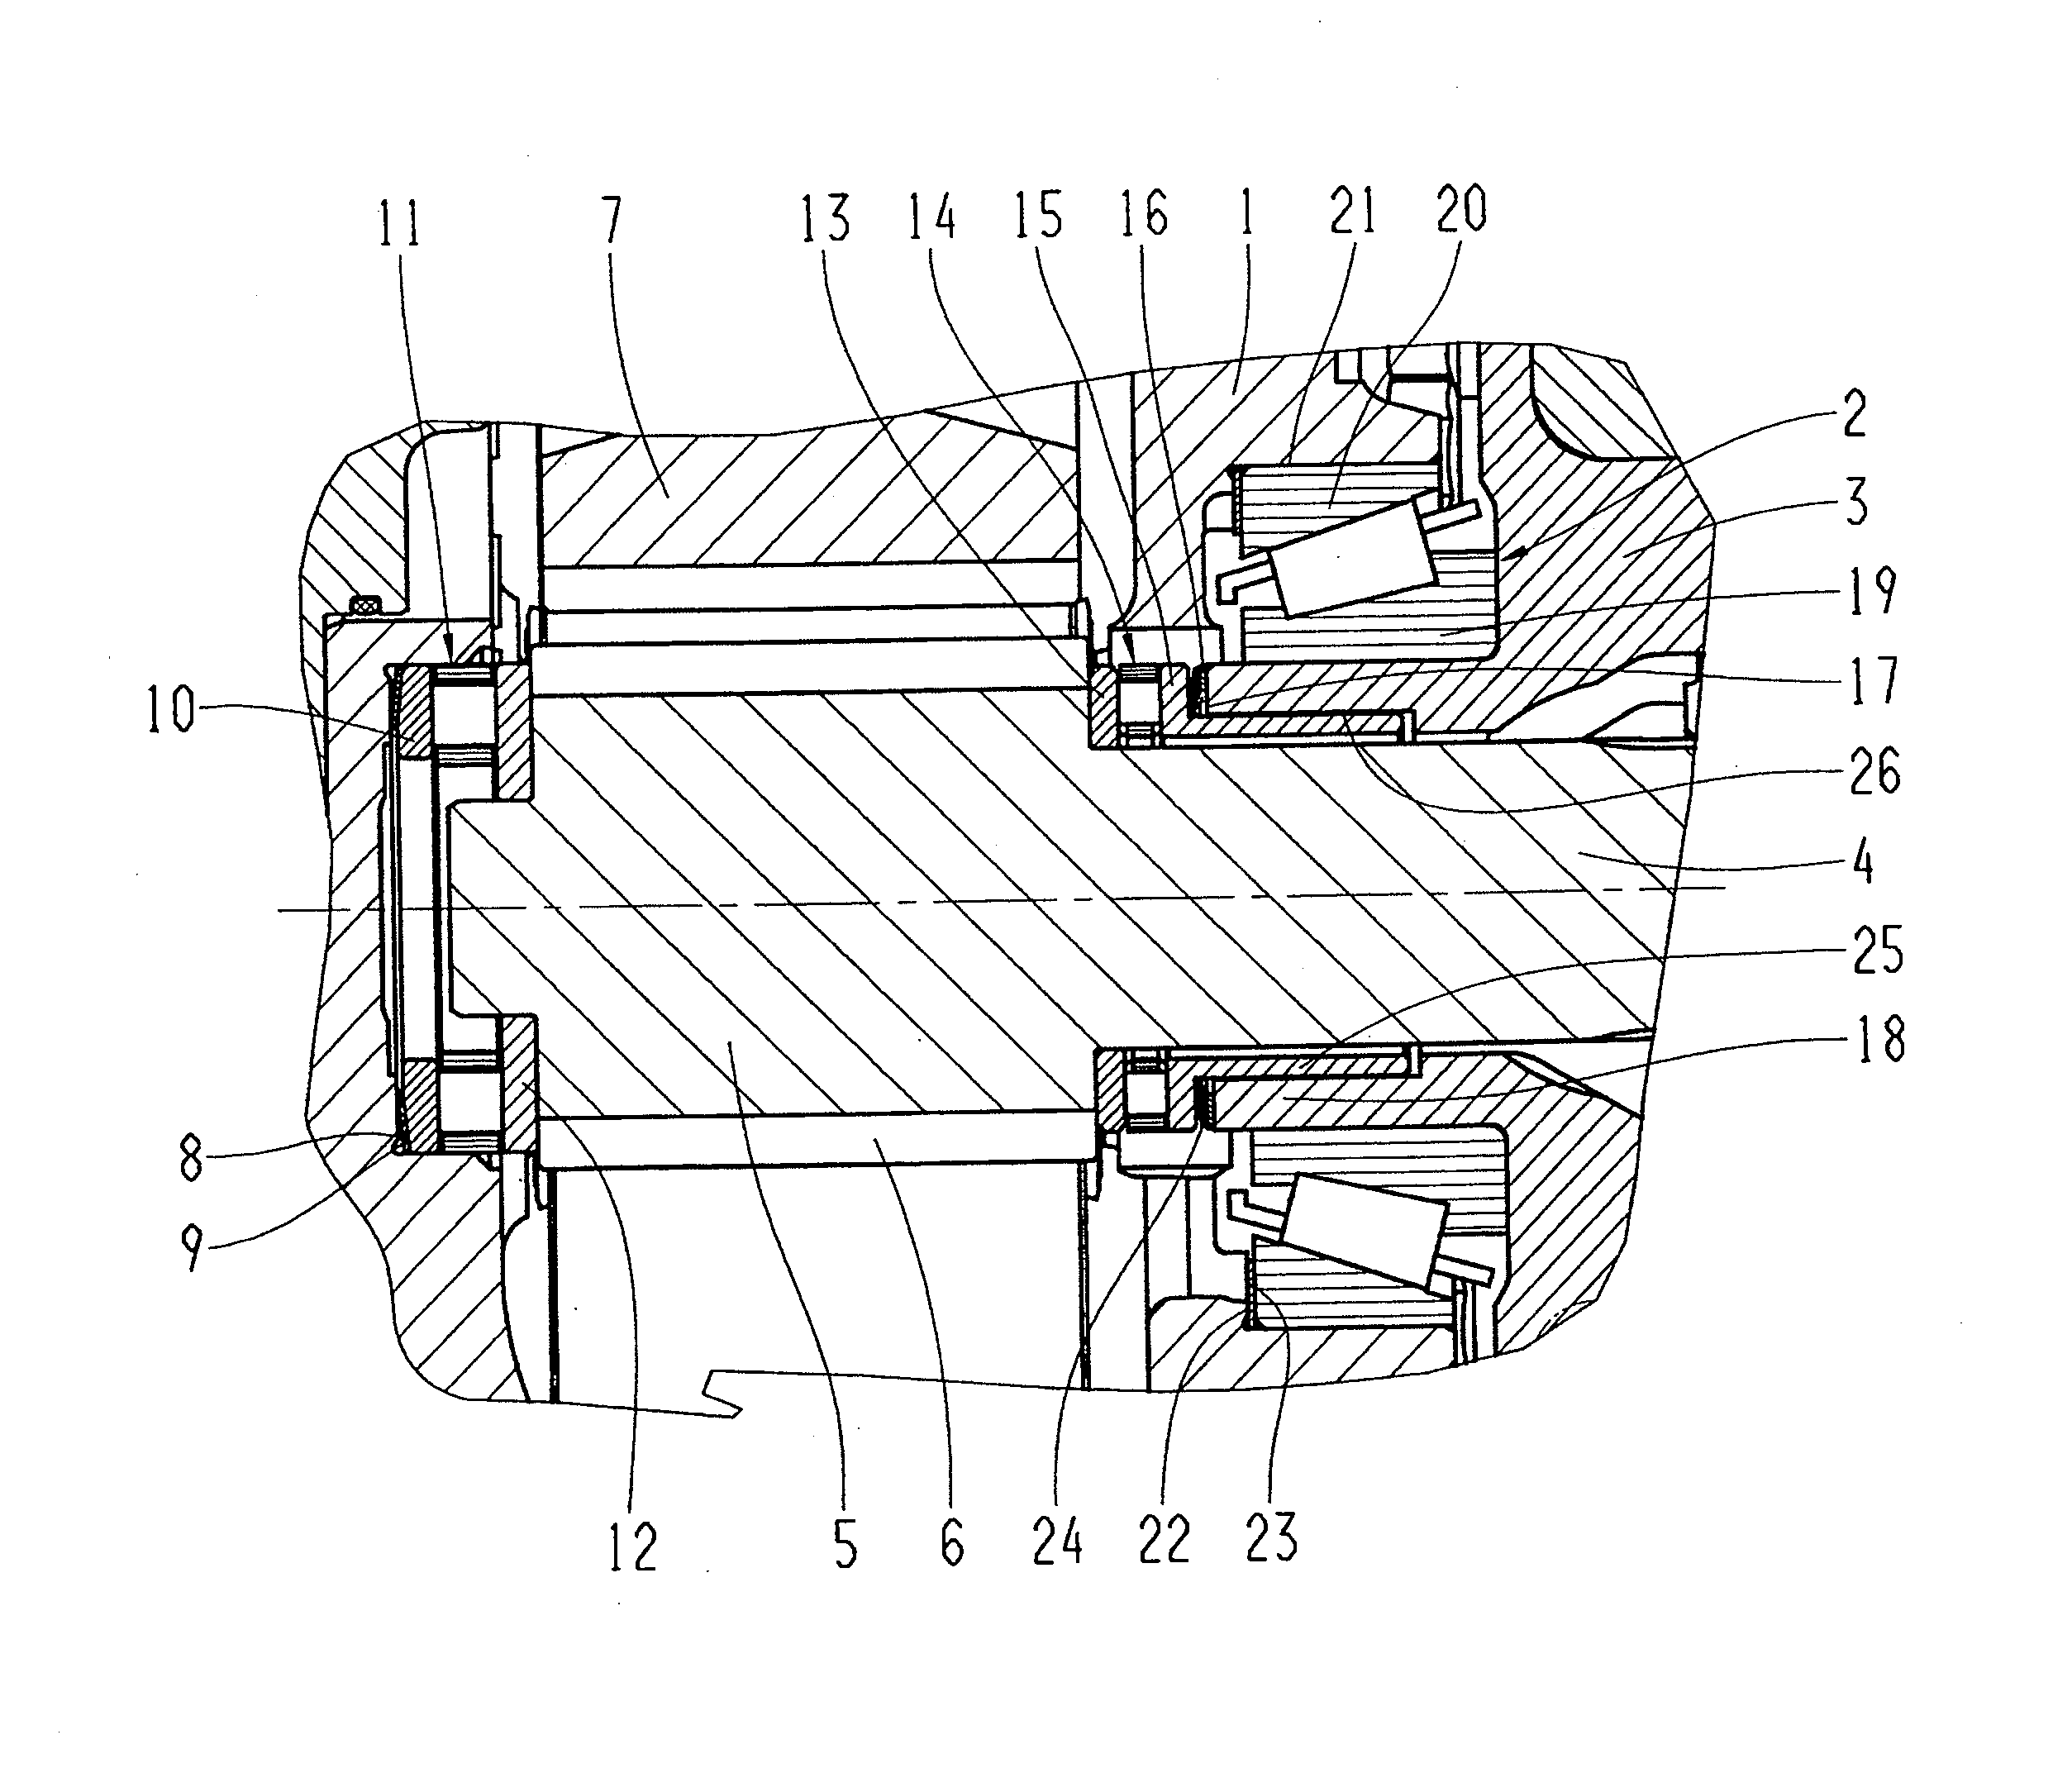 Drive device for the road wheels of a vehicle